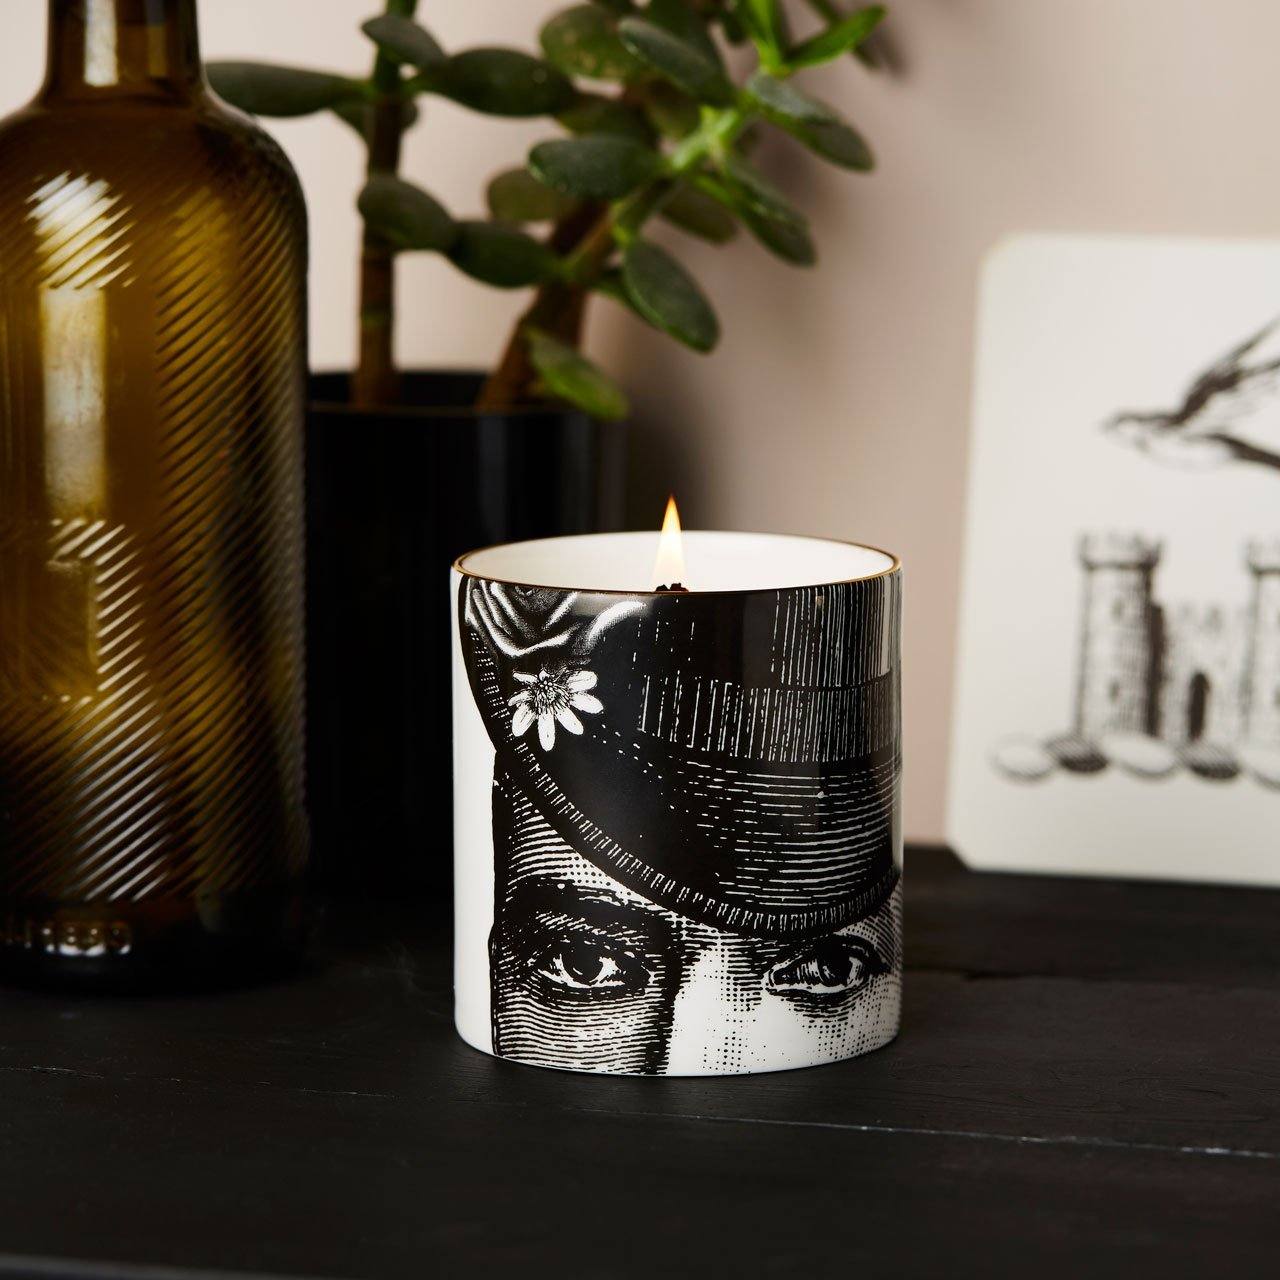 The Dashing Gent Ceramic Candle - Chase and Wonder - Proudly Made in Britain